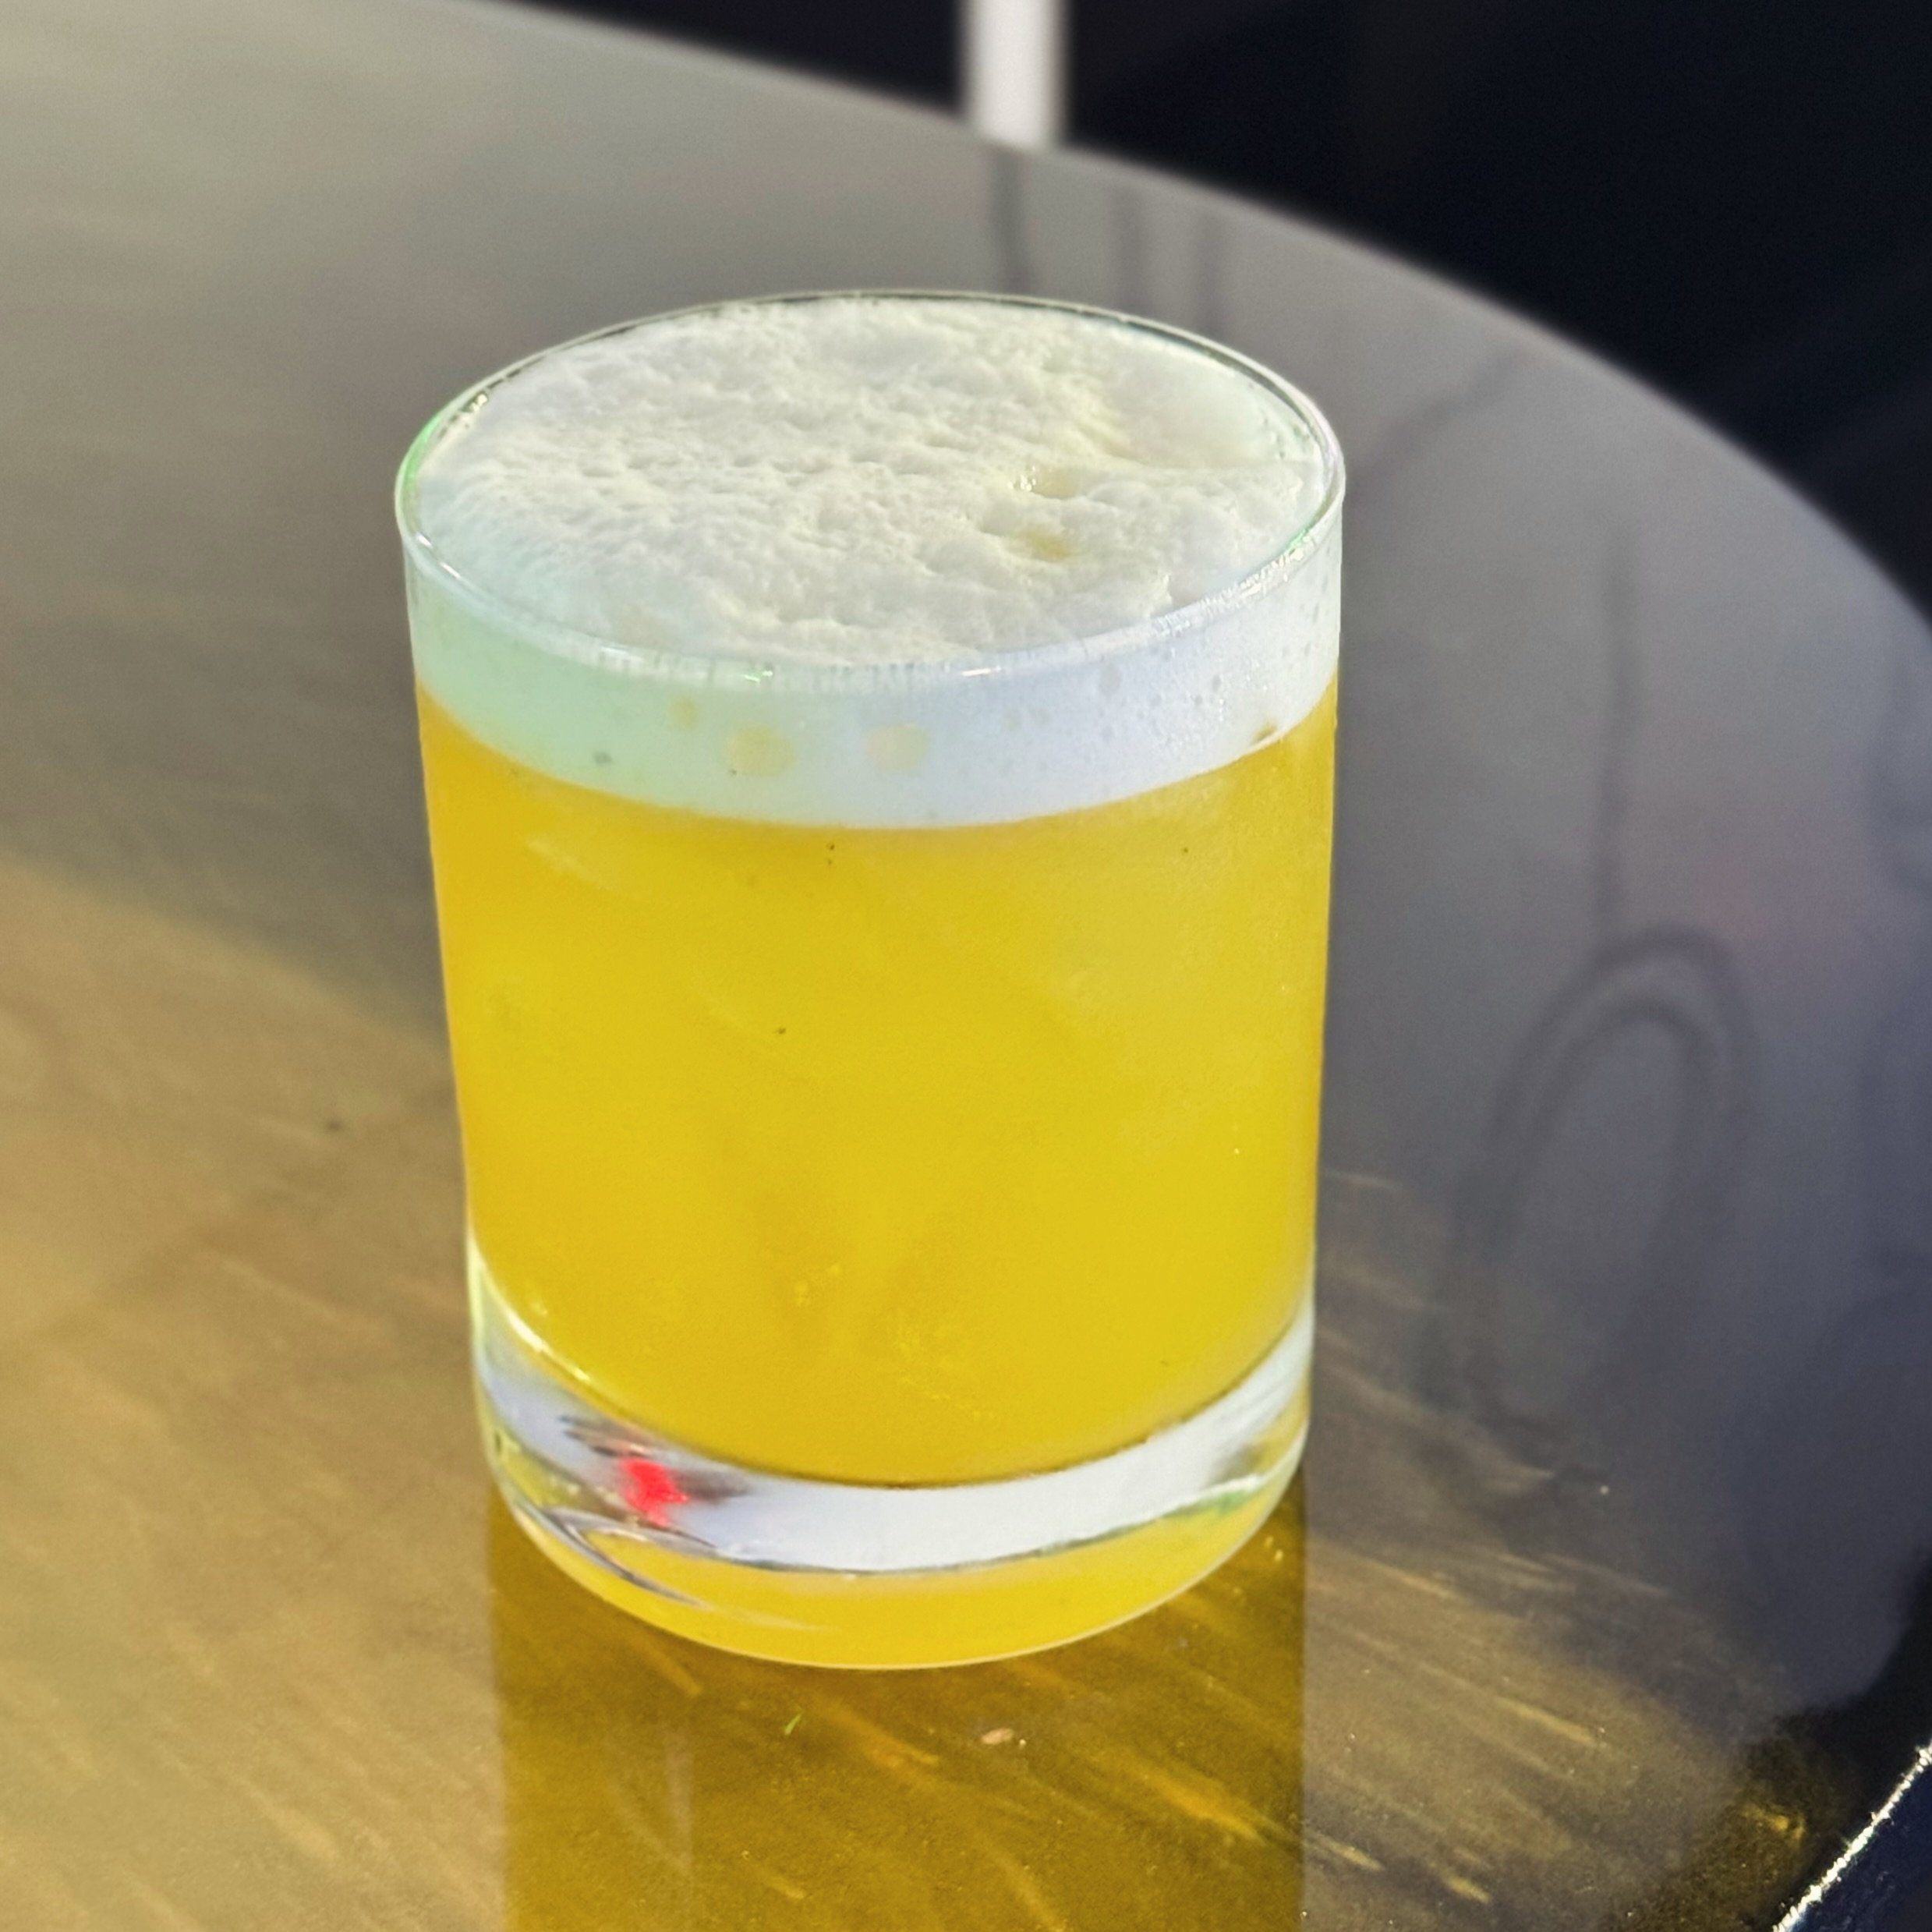 New cocktail alert! 
Introducing The Apollo
Named as much for the NASA projects as the Greek god of the sun, music, poetry and art. It is springtime and this is a cool sipper you can enjoy on the upcoming space patio!

Avocado washed Bahnez Mezcal
Pa